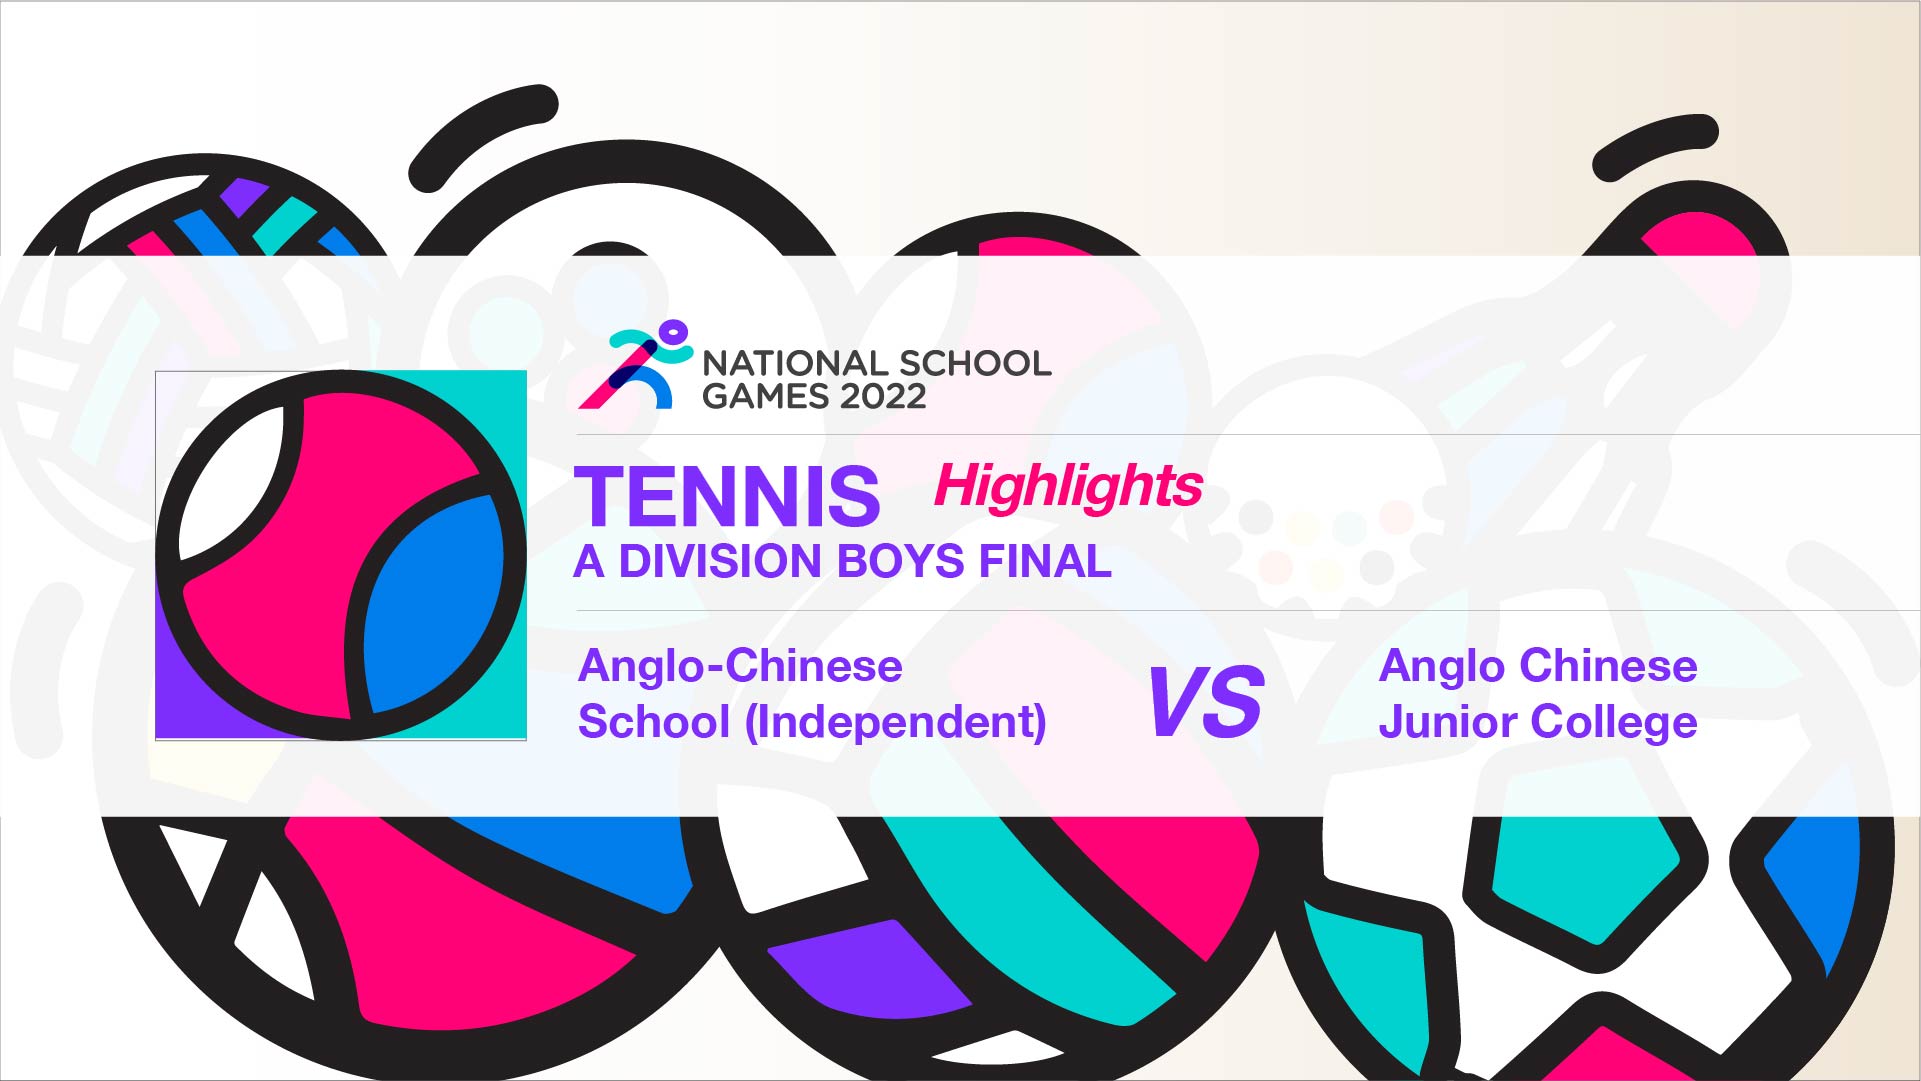 SSSC Tennis National A Division Boys Final Anglo-Chinese School (Independent) vs Anglo Chinese Junior College - Highlights